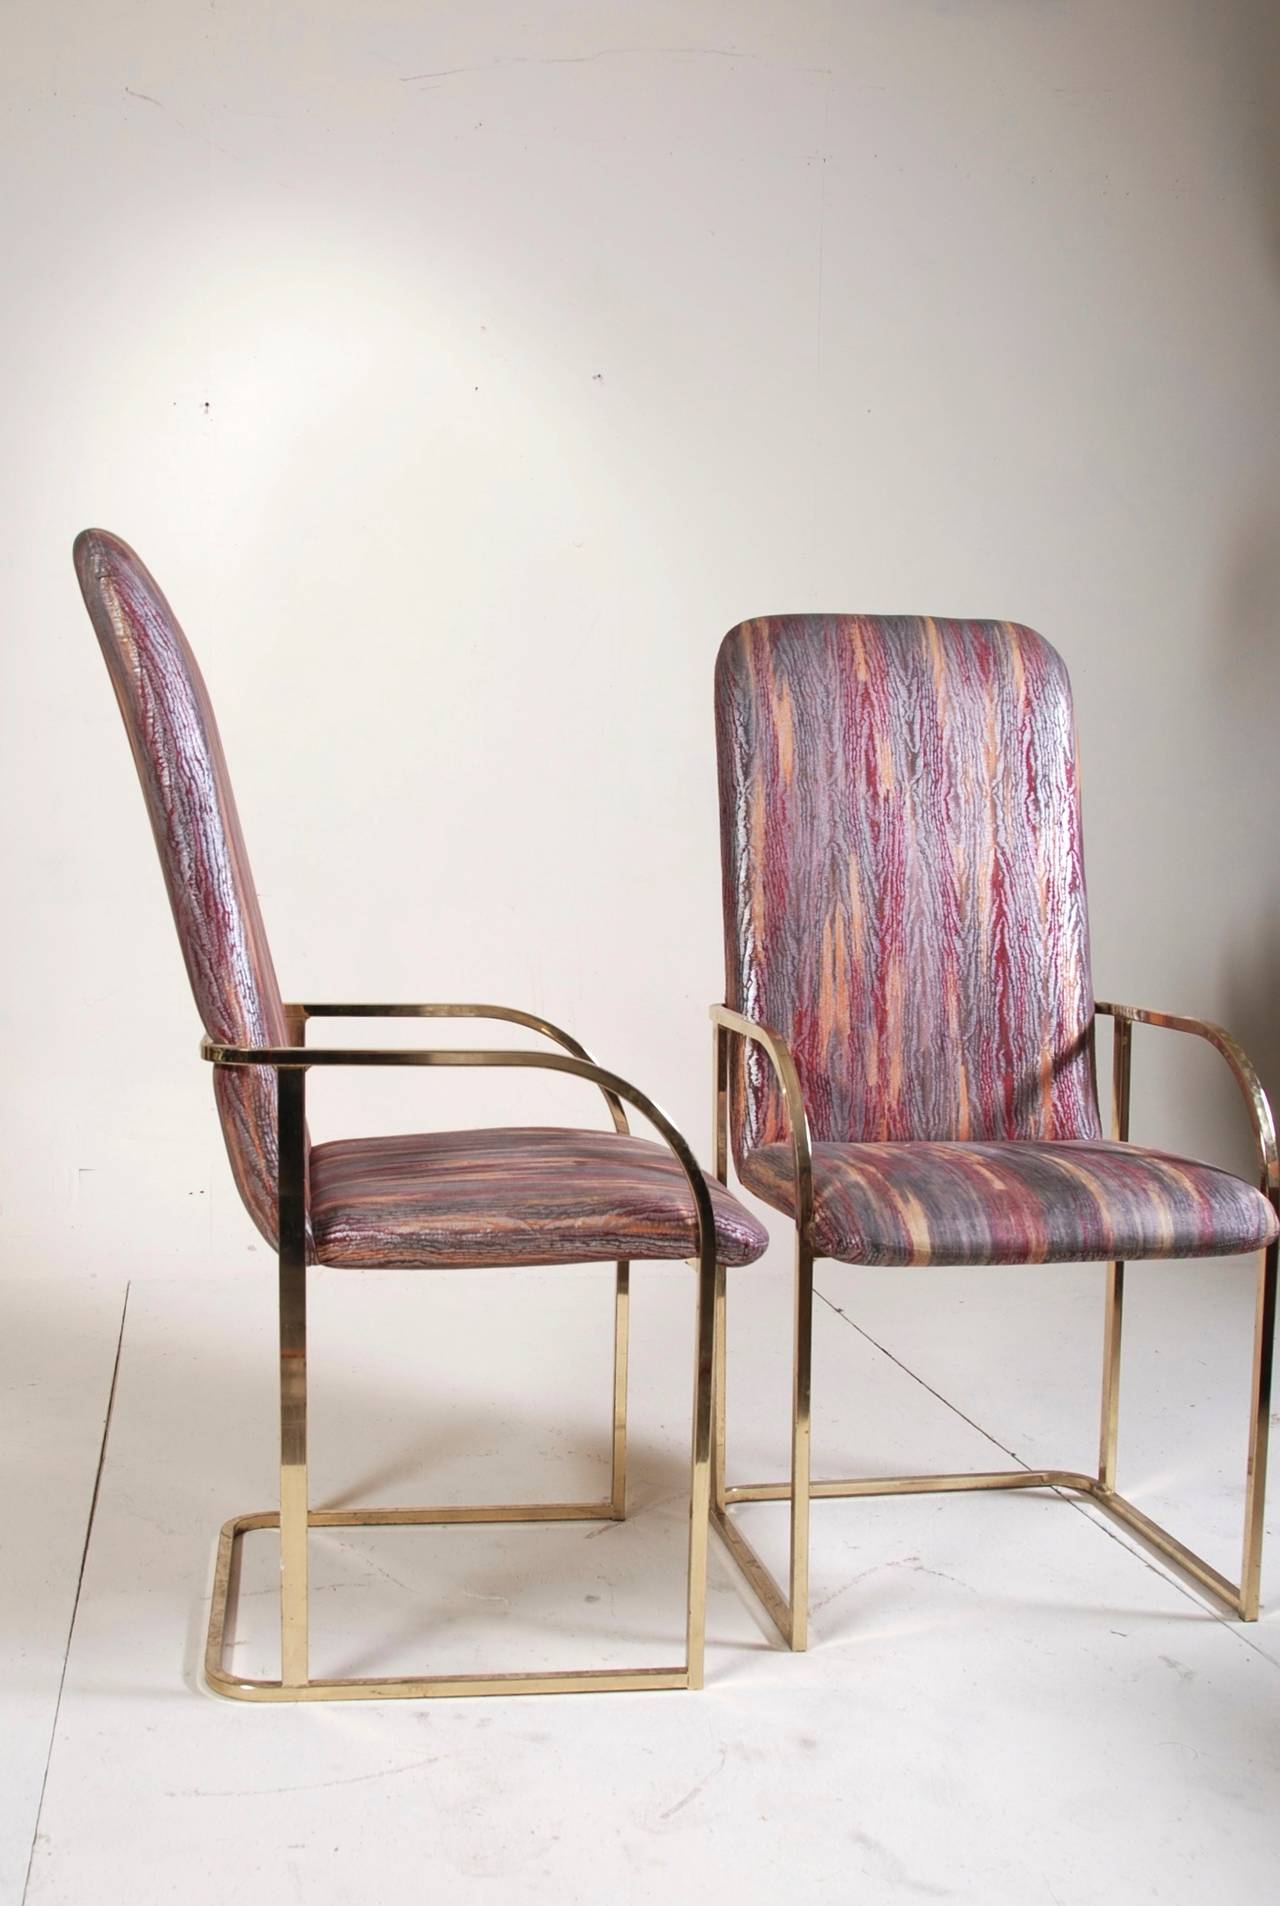 A pair of Milo Baughman dining chairs for DIA. These chairs are in good vintage condition with age appropriate wear.